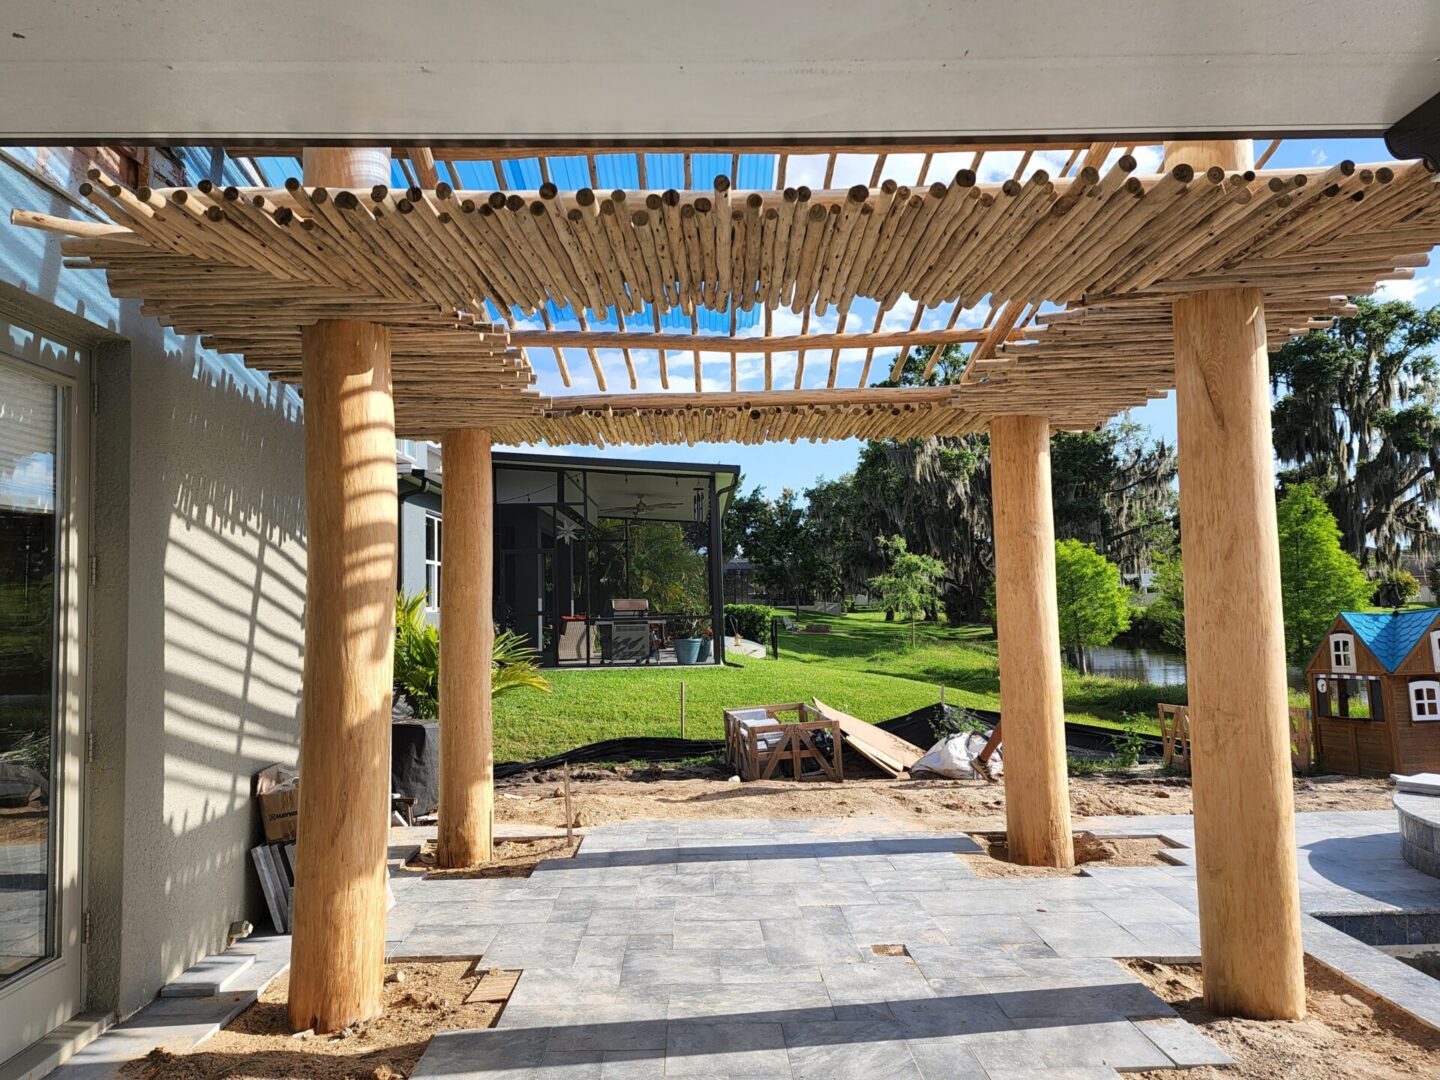 A wooden pergola is being built in a backyard.